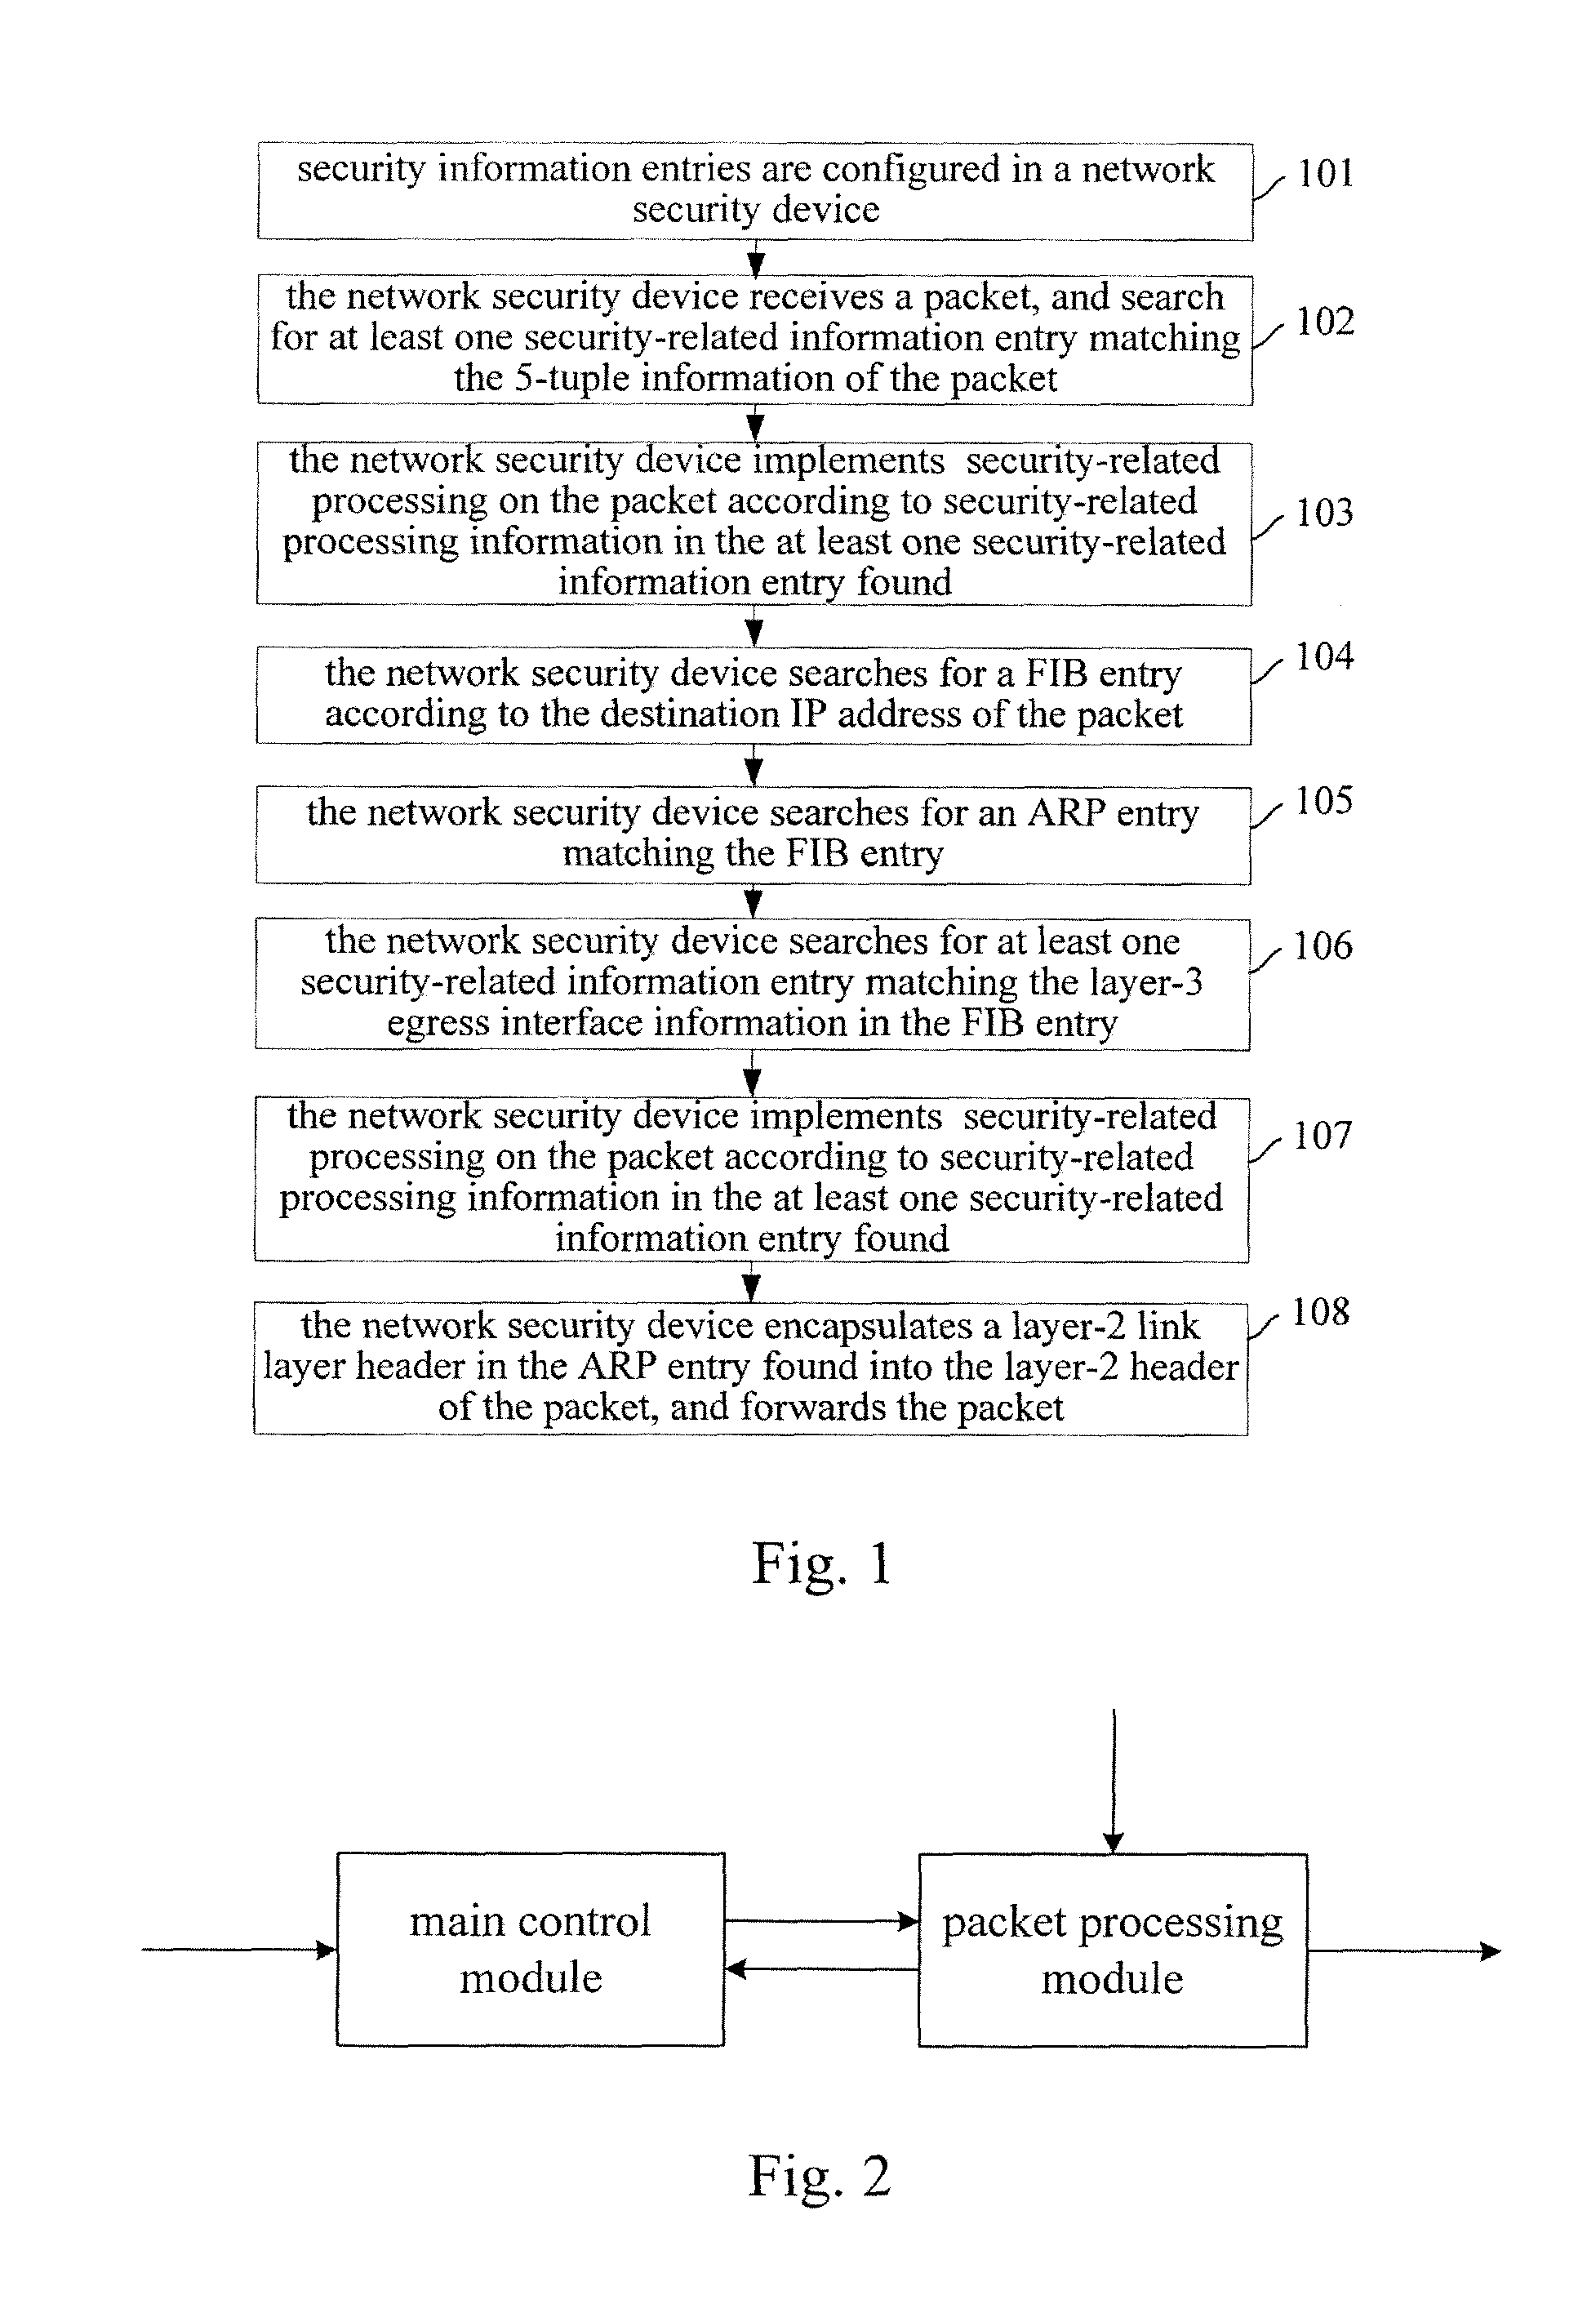 Method for implementing security-related processing on packet and network security device